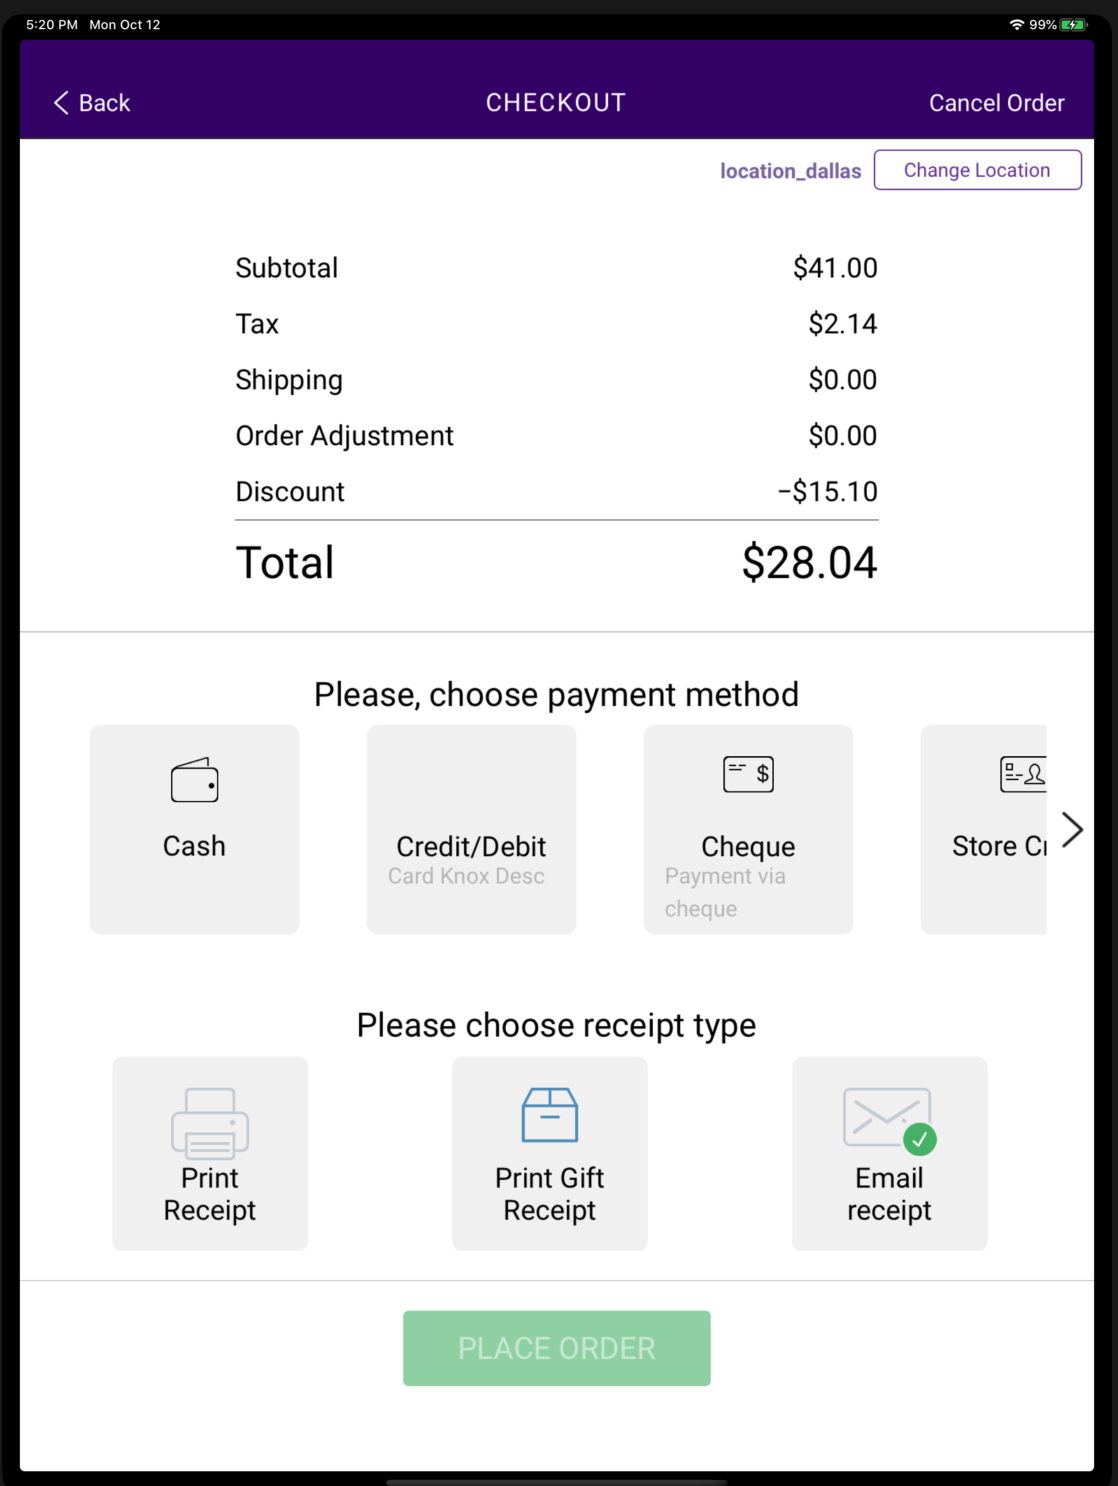 The checkout page prompting the user to select a payment method